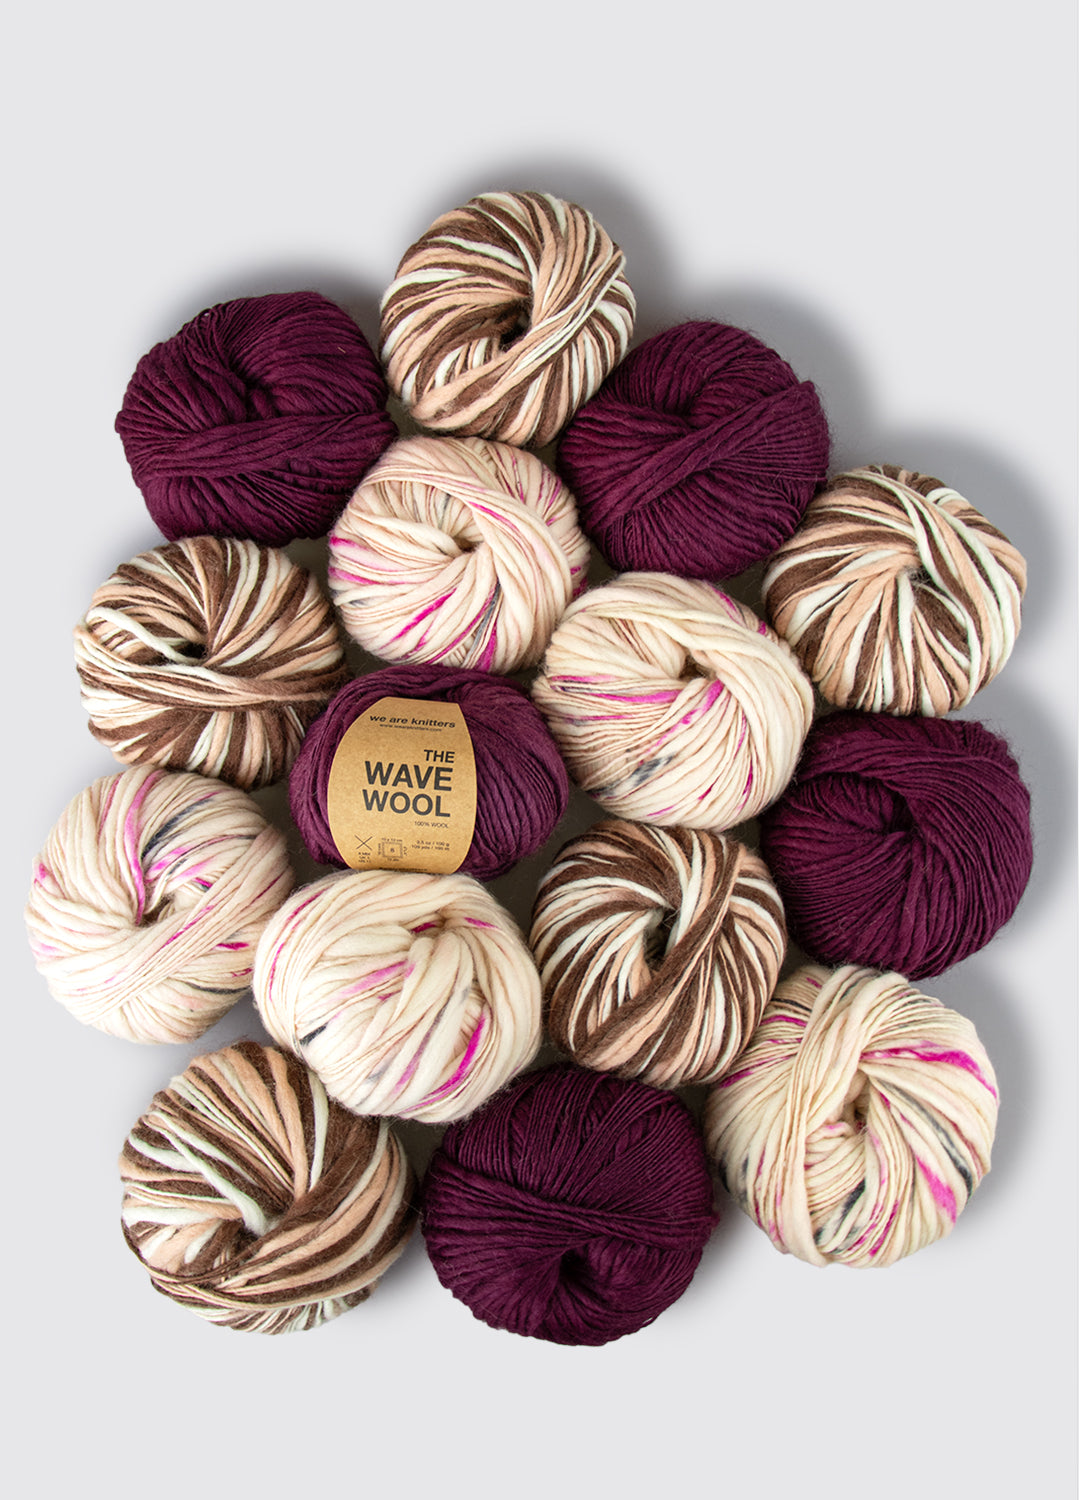 15 Pack of Wave Yarn Balls